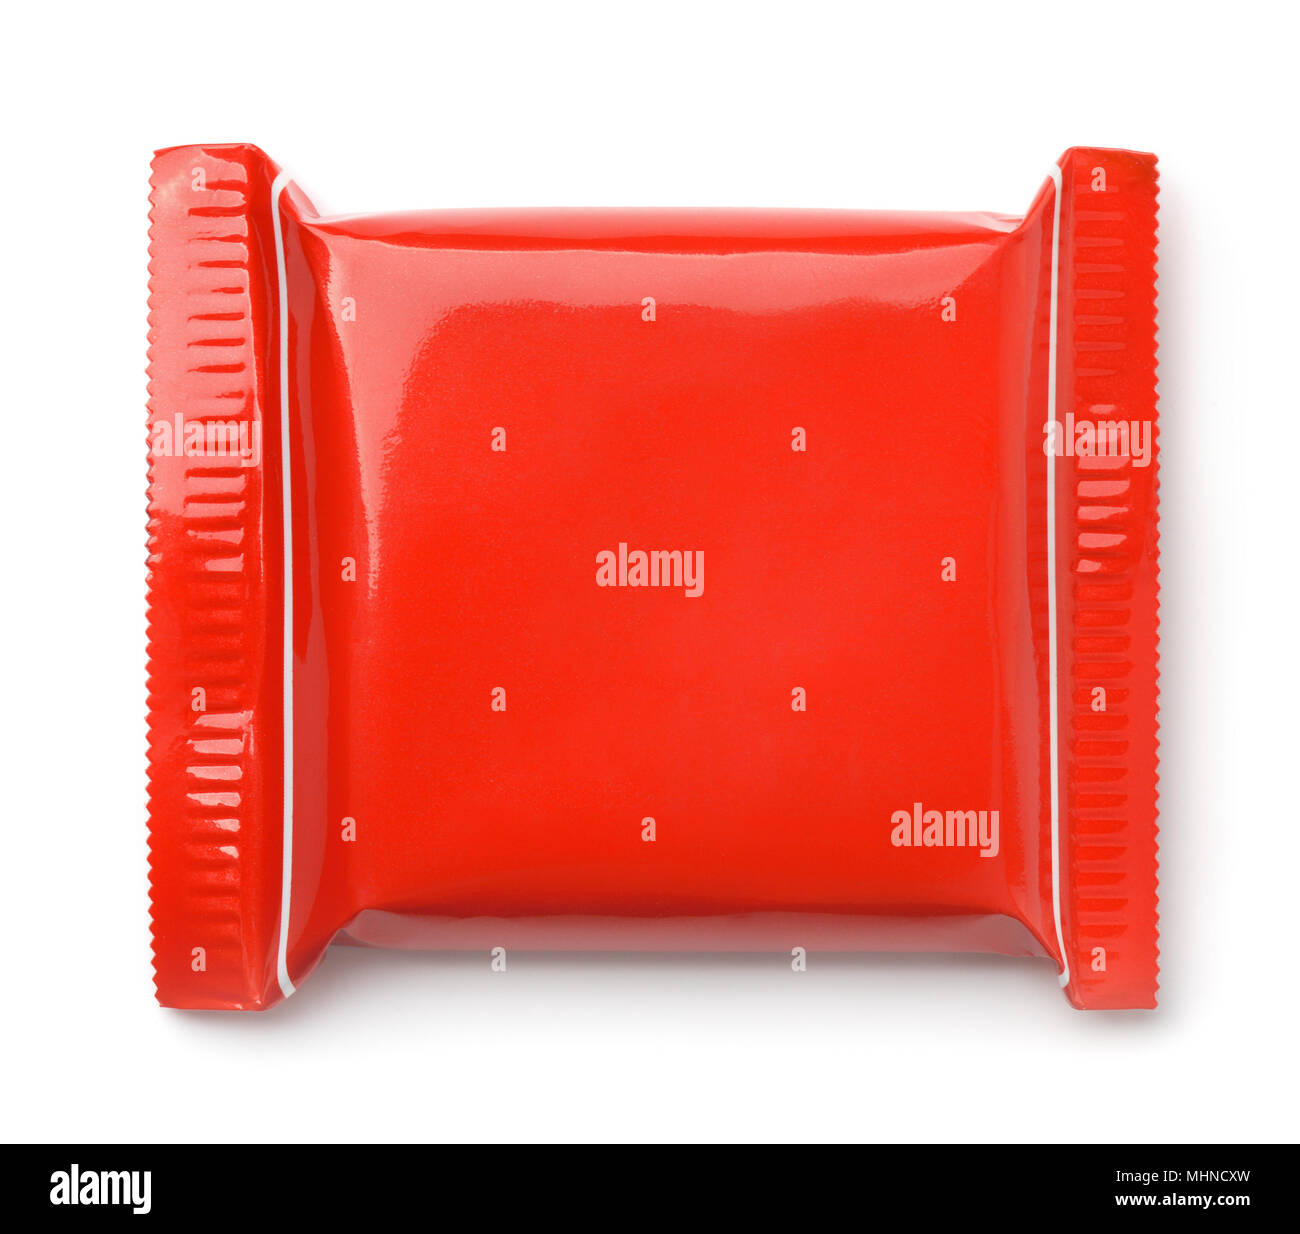 https://c8.alamy.com/comp/MHNCXW/top-view-of-red-food-package-bag-isolated-on-white-MHNCXW.jpg